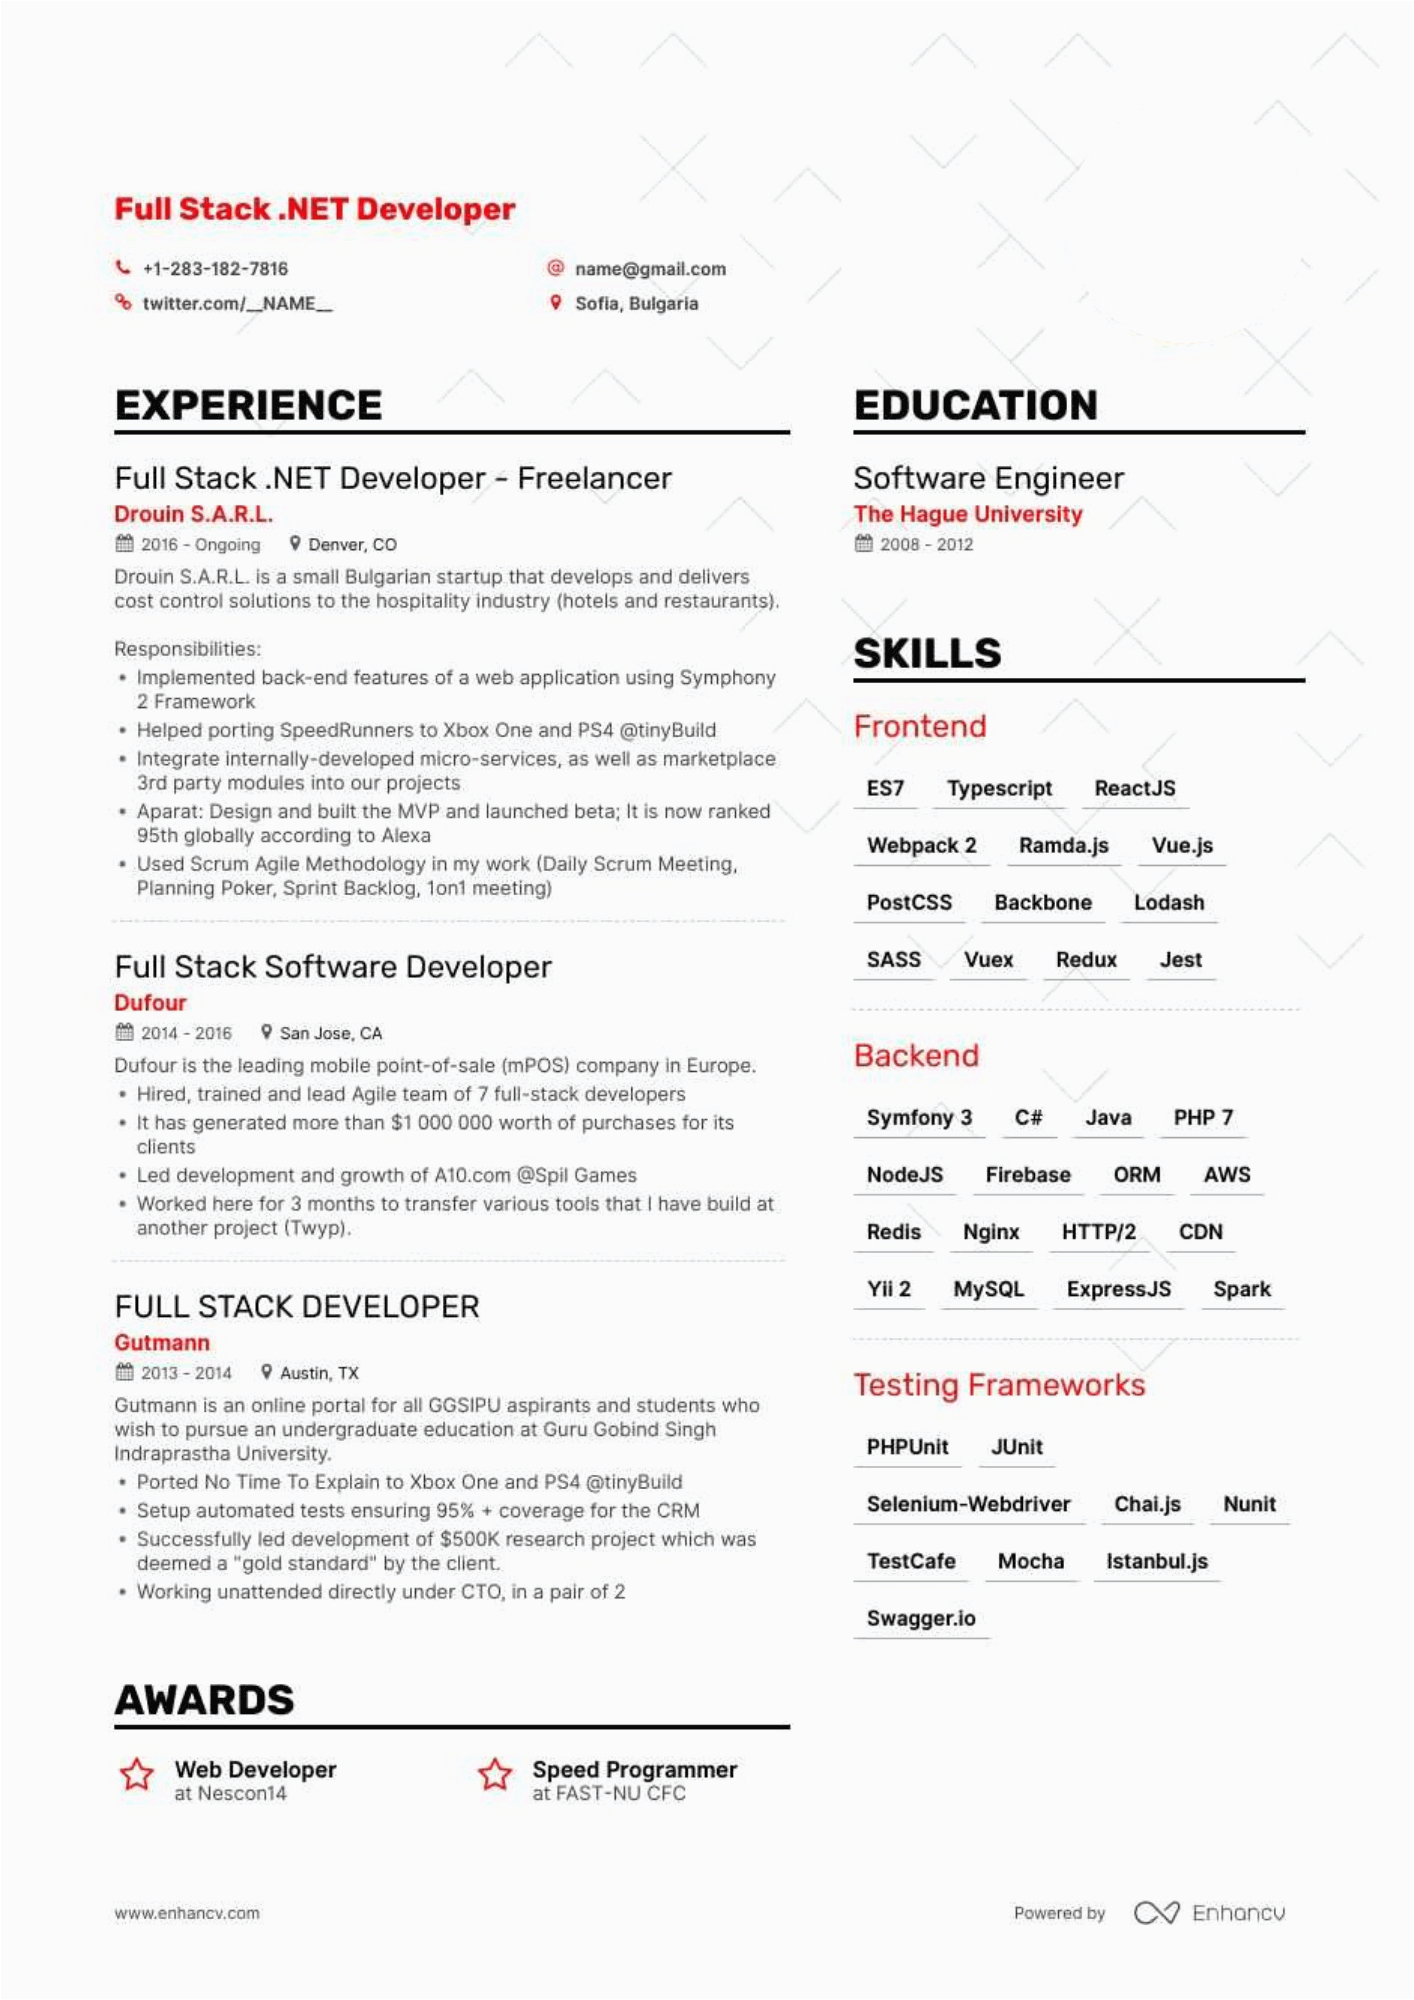 Coursera Ui Full Stack Experience On the Sample Resume 10 Professional React Js Java Resume Samples